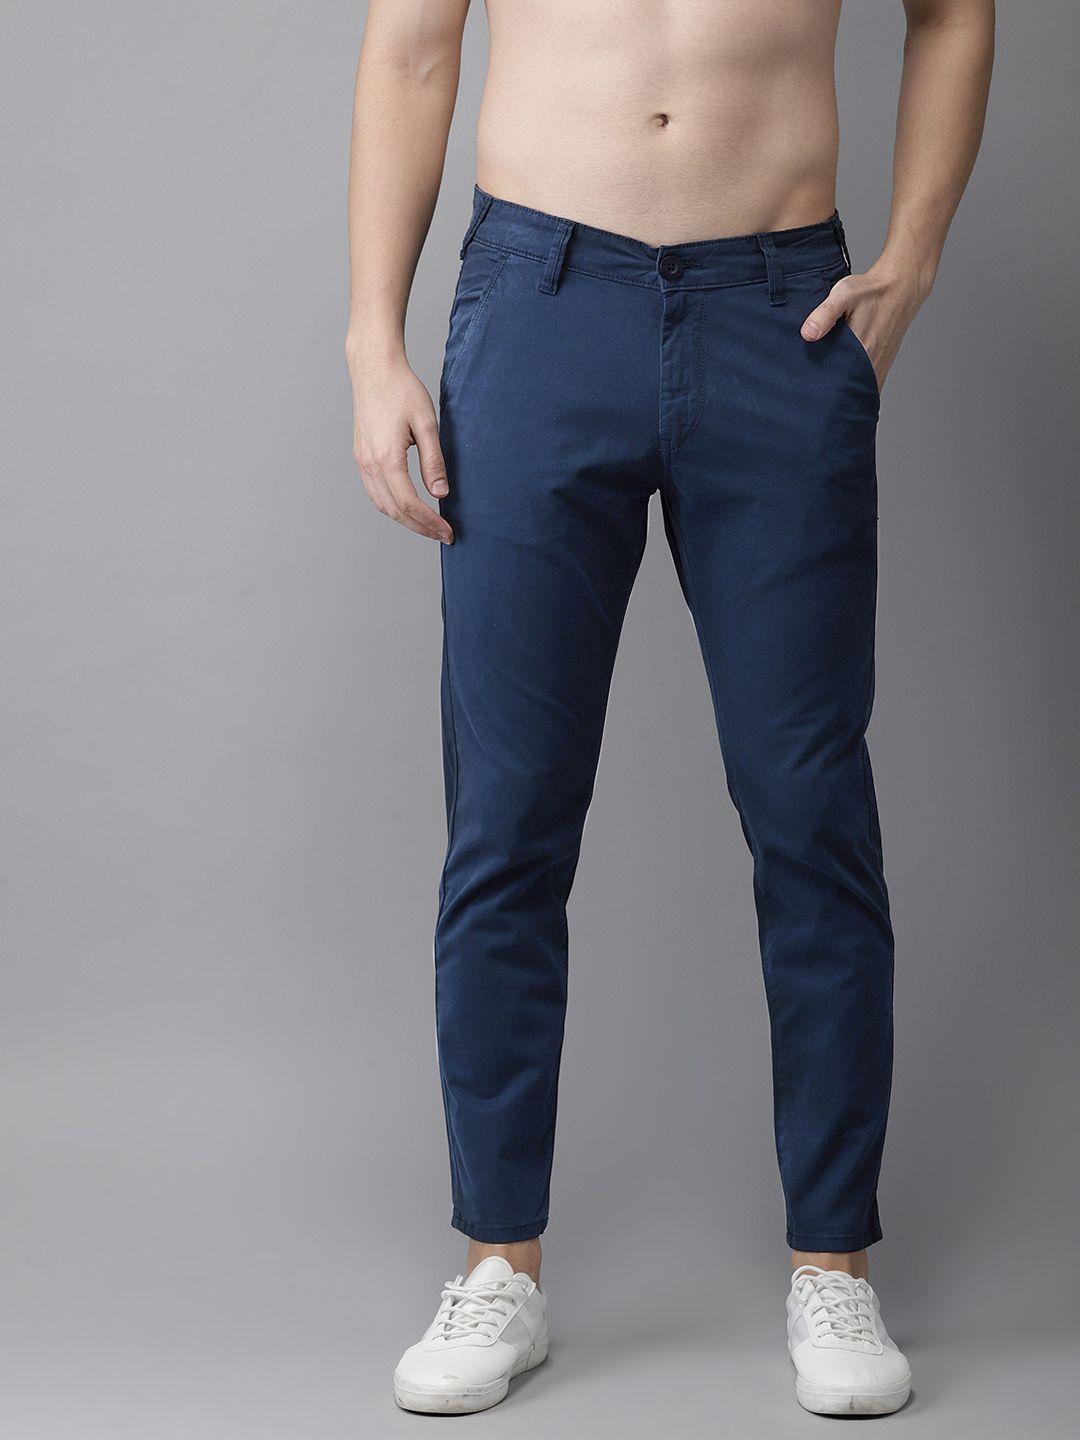 here&now-men-navy-blue-slim-fit-solid-chinos